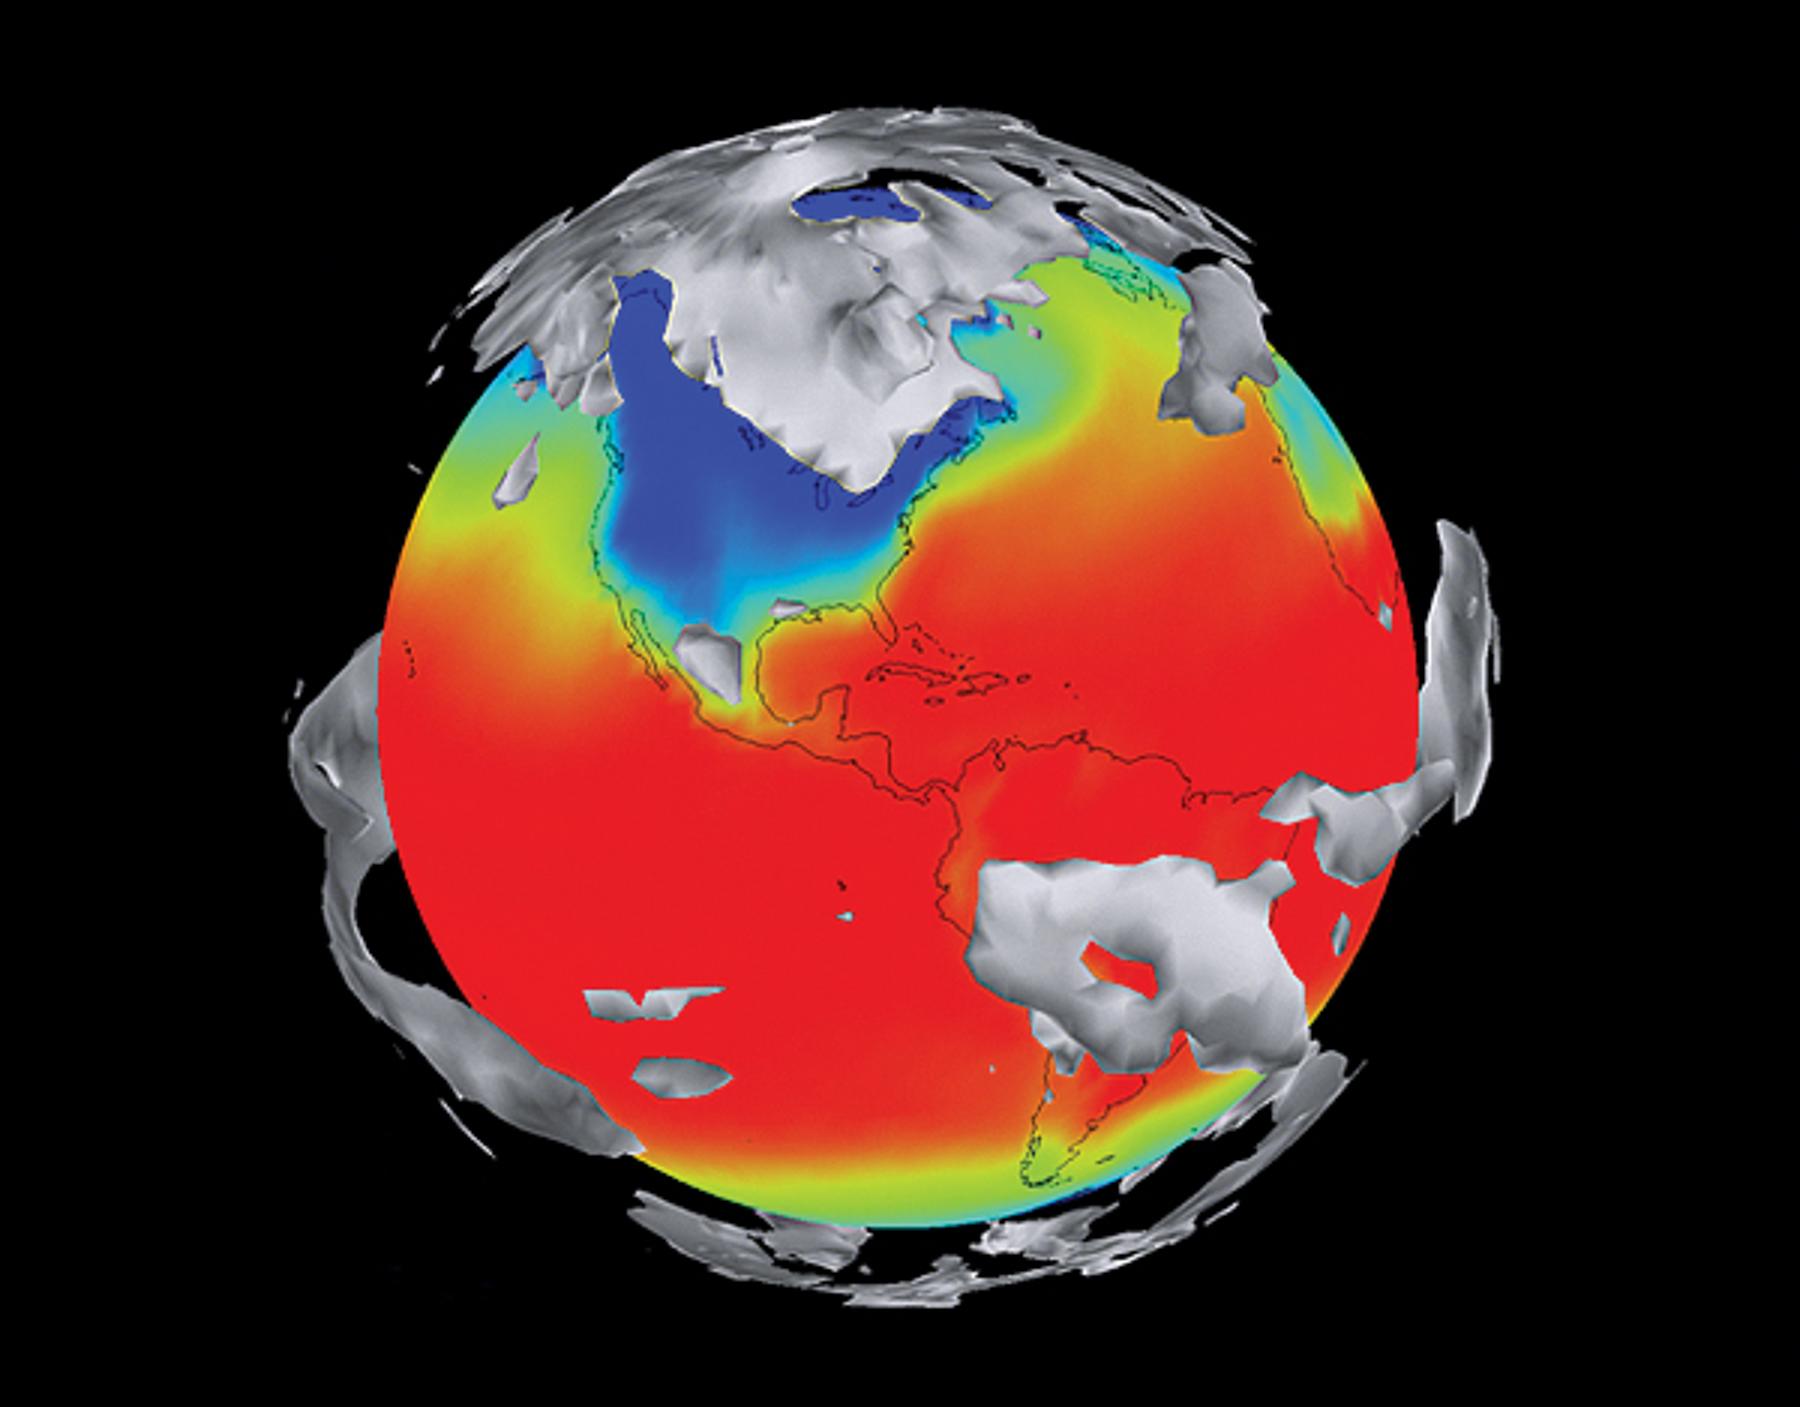 Scientists use the Community Climate System Model to increase their understanding of the world’s climate patterns and learn how they may affect regions around the globe.